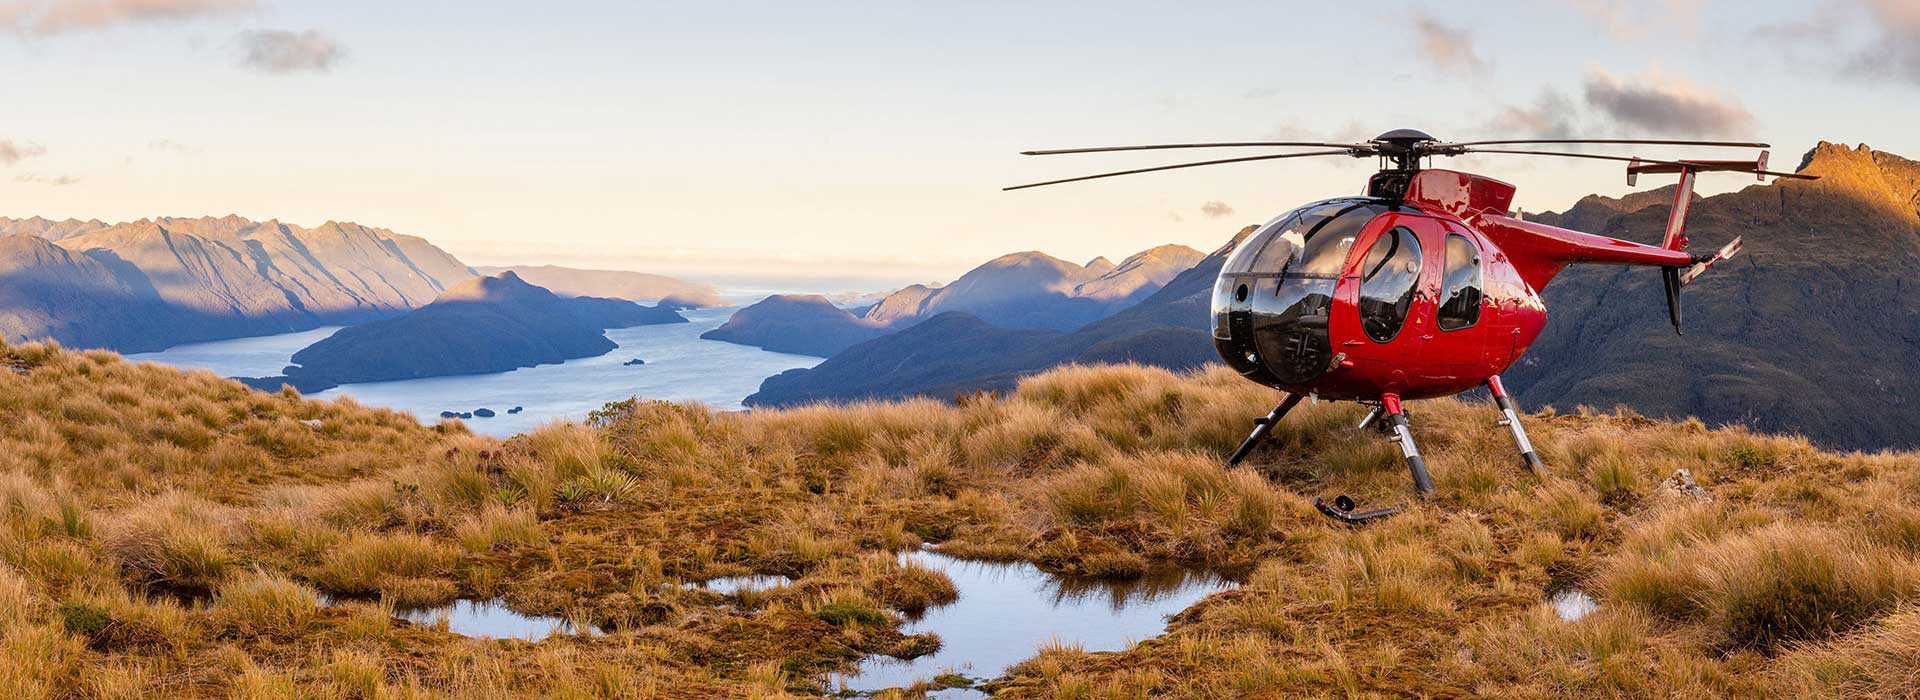 Fiordland Helicopter Charters